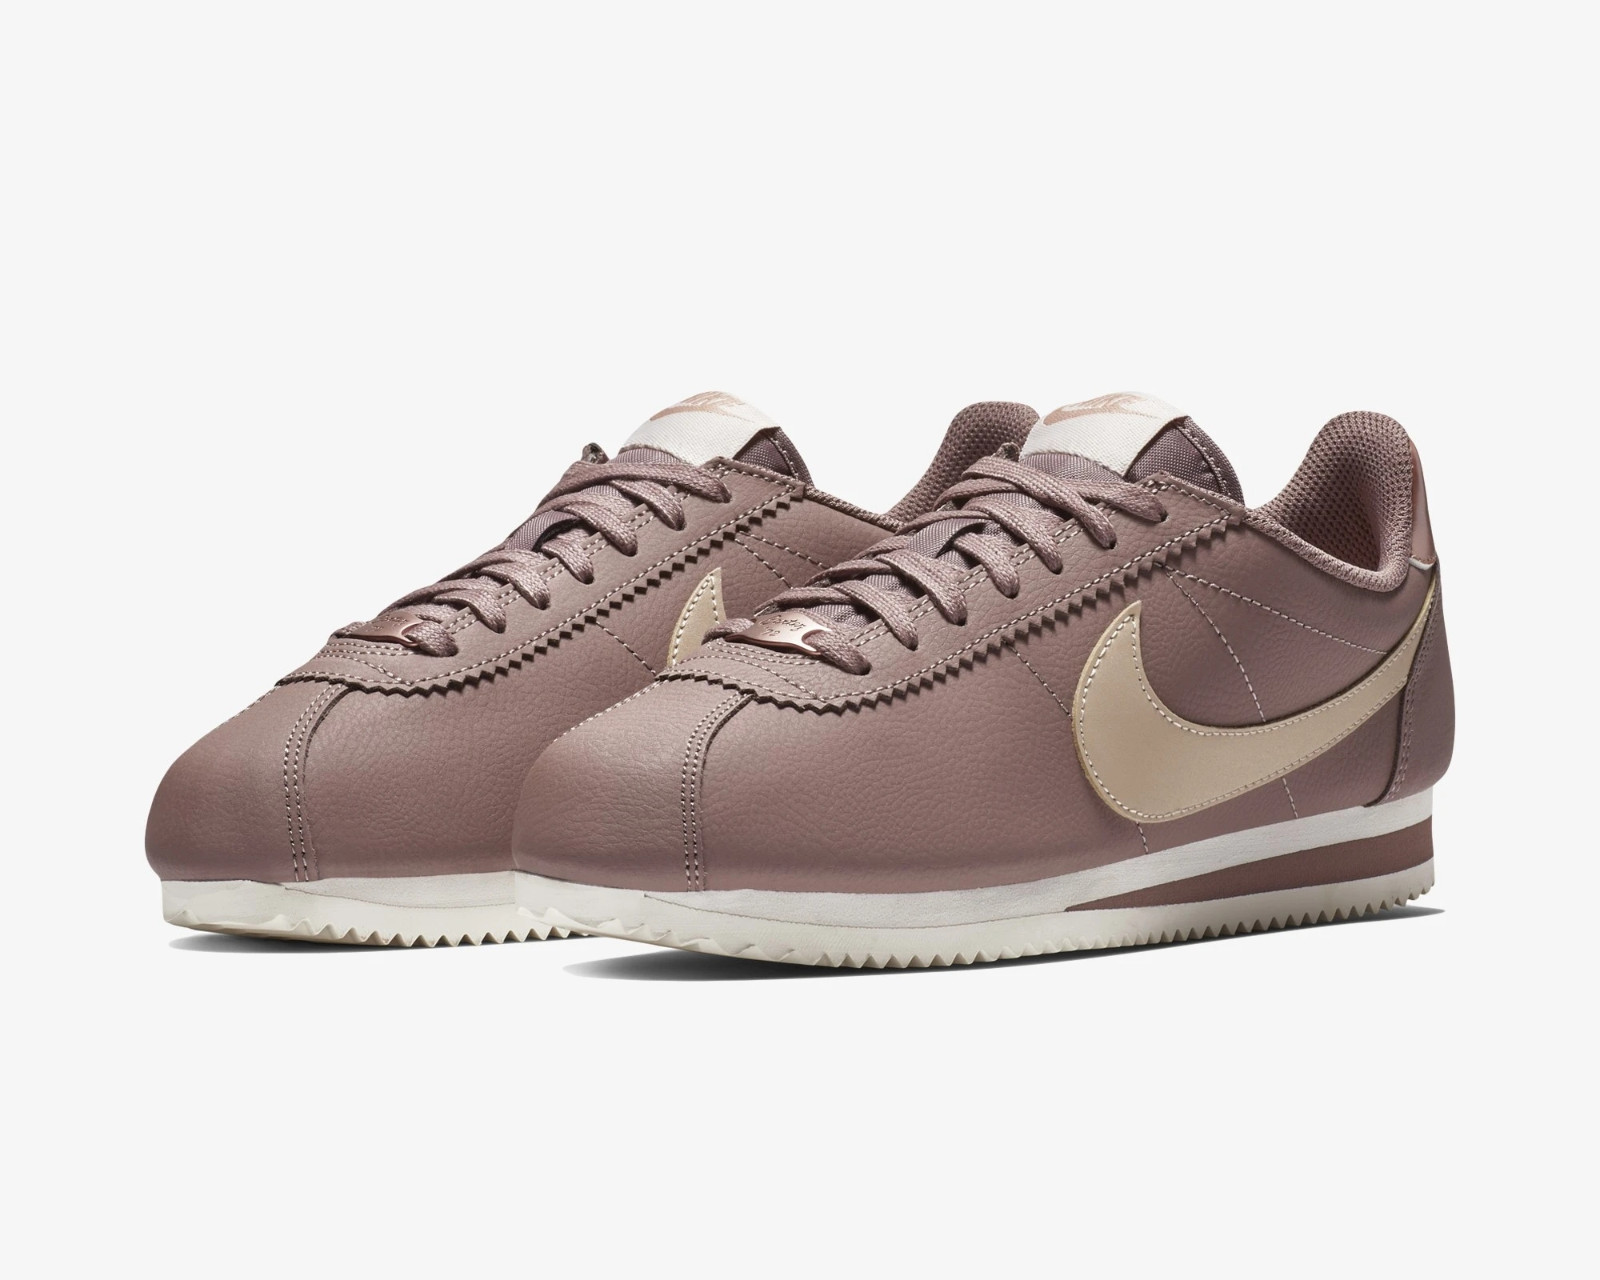 toewijding Pellen Geroosterd nike air max yellow silver red rose plant care - 200 - GmarShops - Nike  Classic Cortez Leather Particle Beige Smokey Mauve Metallic Red Bronze  AV4618